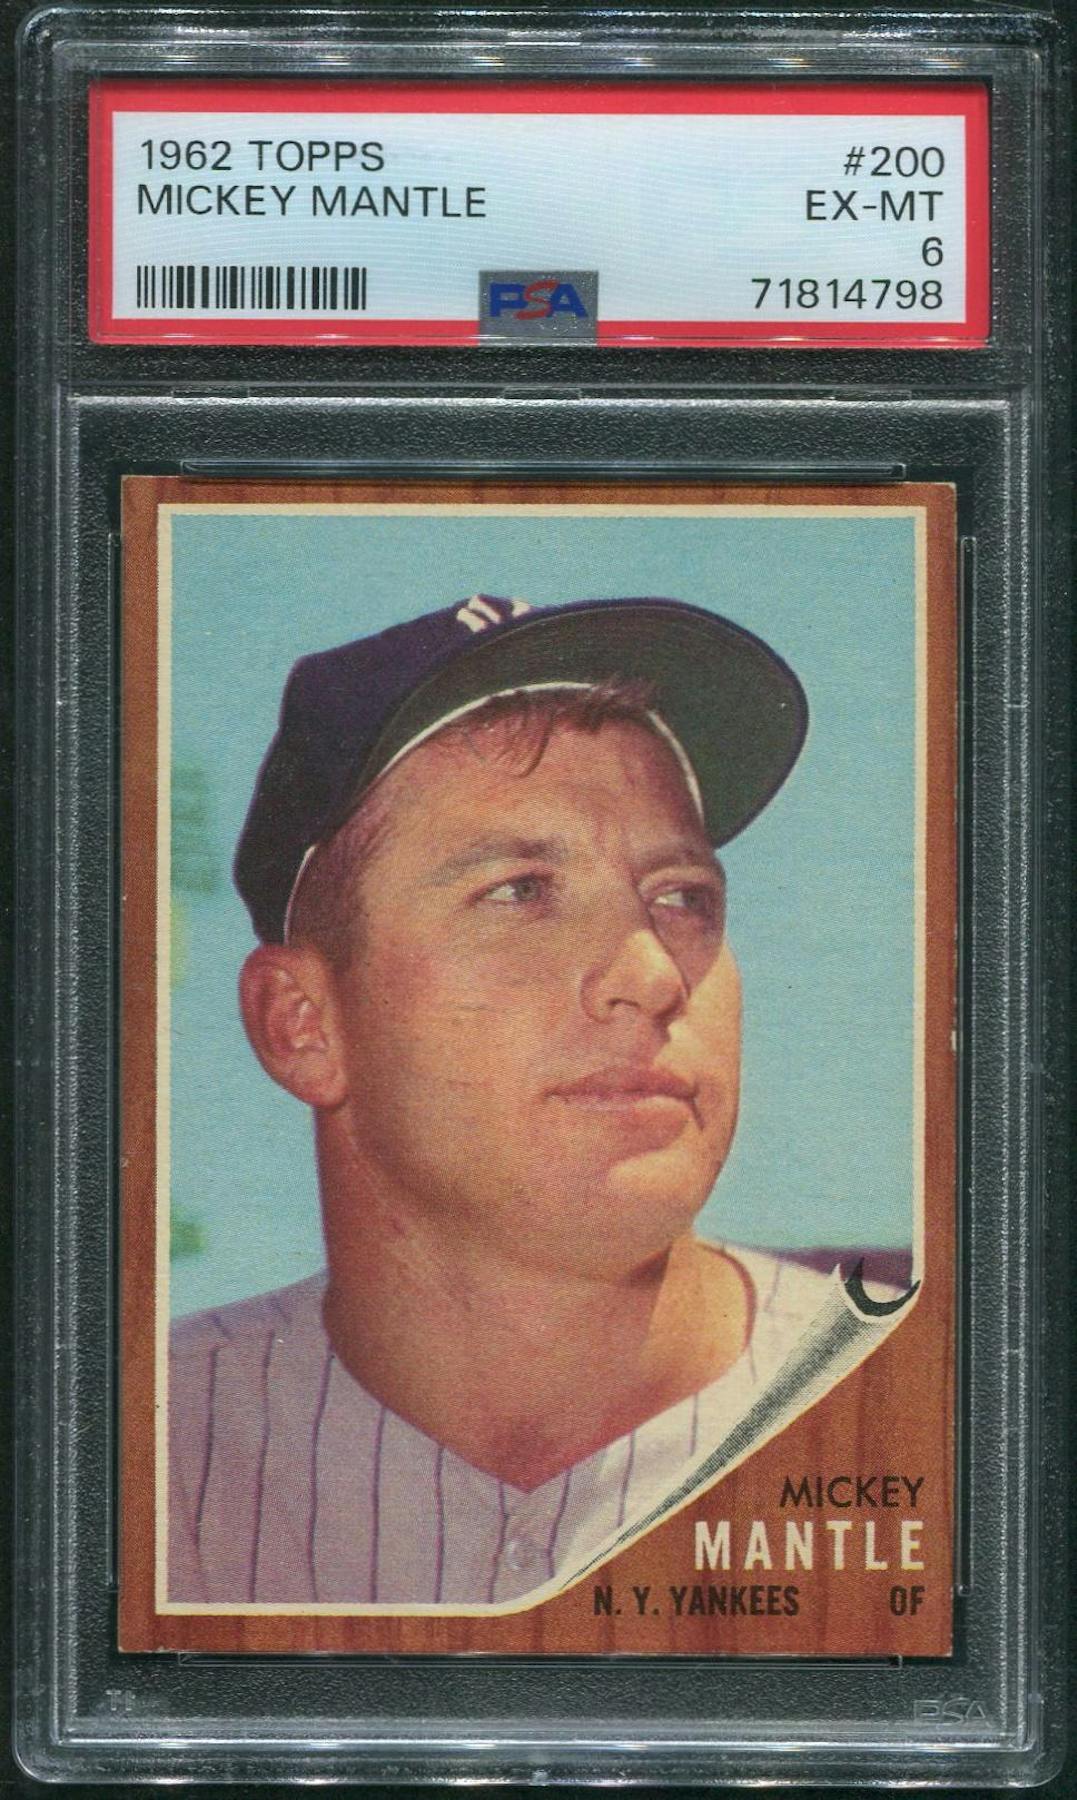 1962 Topps Mickey Mantle (All Star)